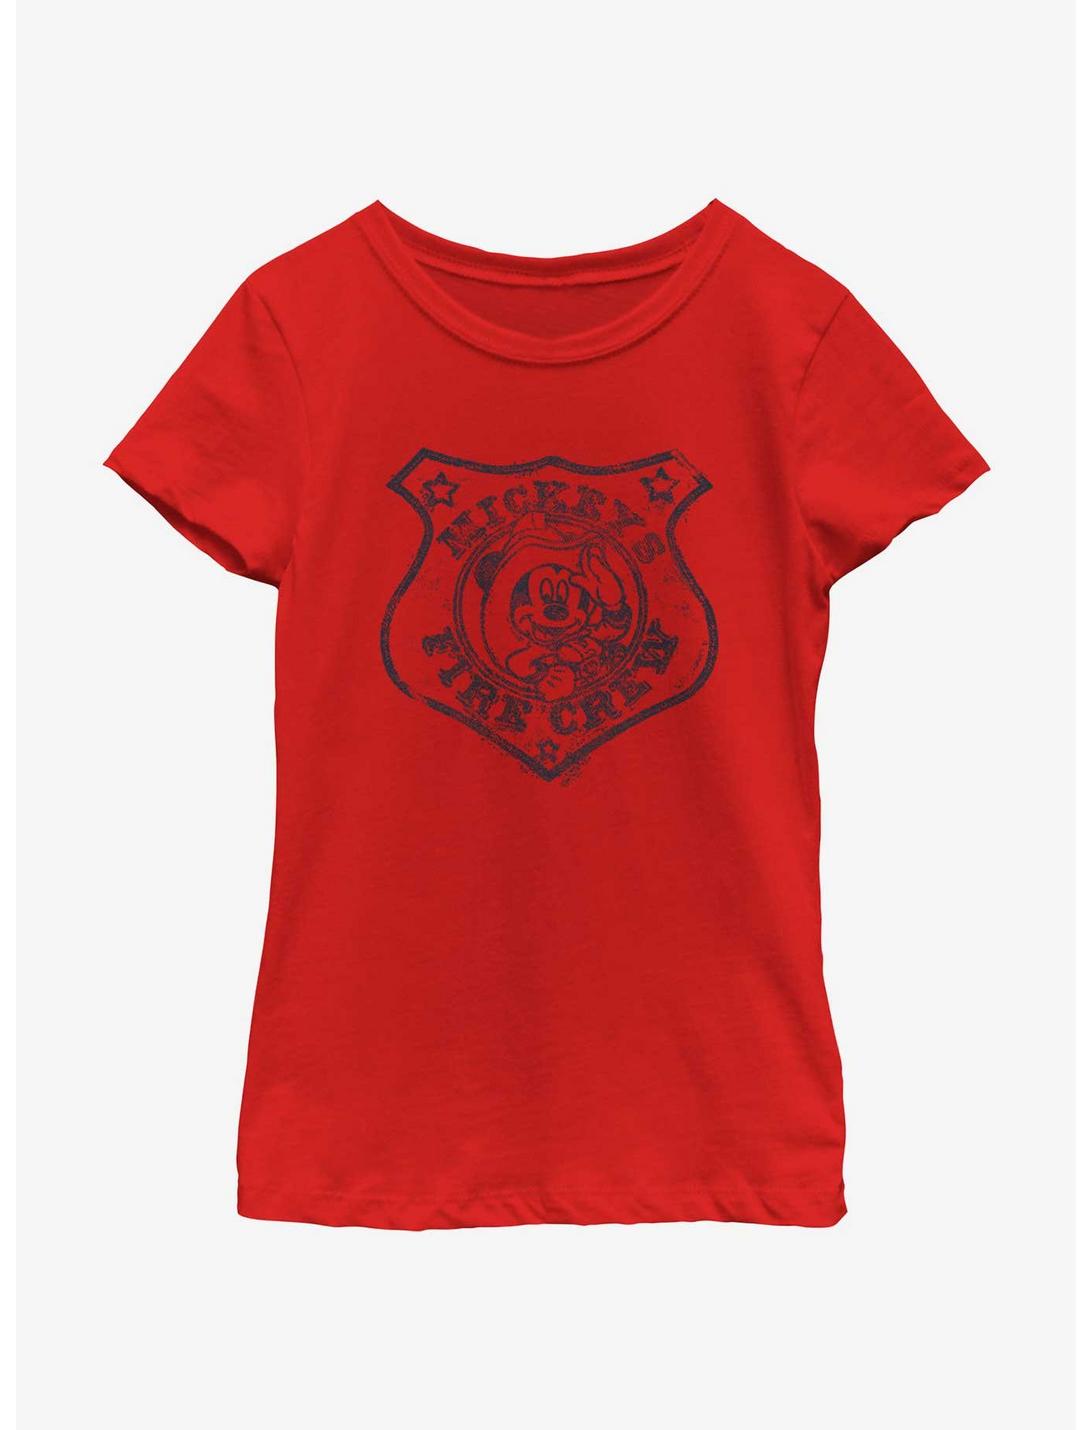 Disney Mickey Mouse Mickey's Fire Crew Badge Girls Youth T-Shirt, RED, hi-res